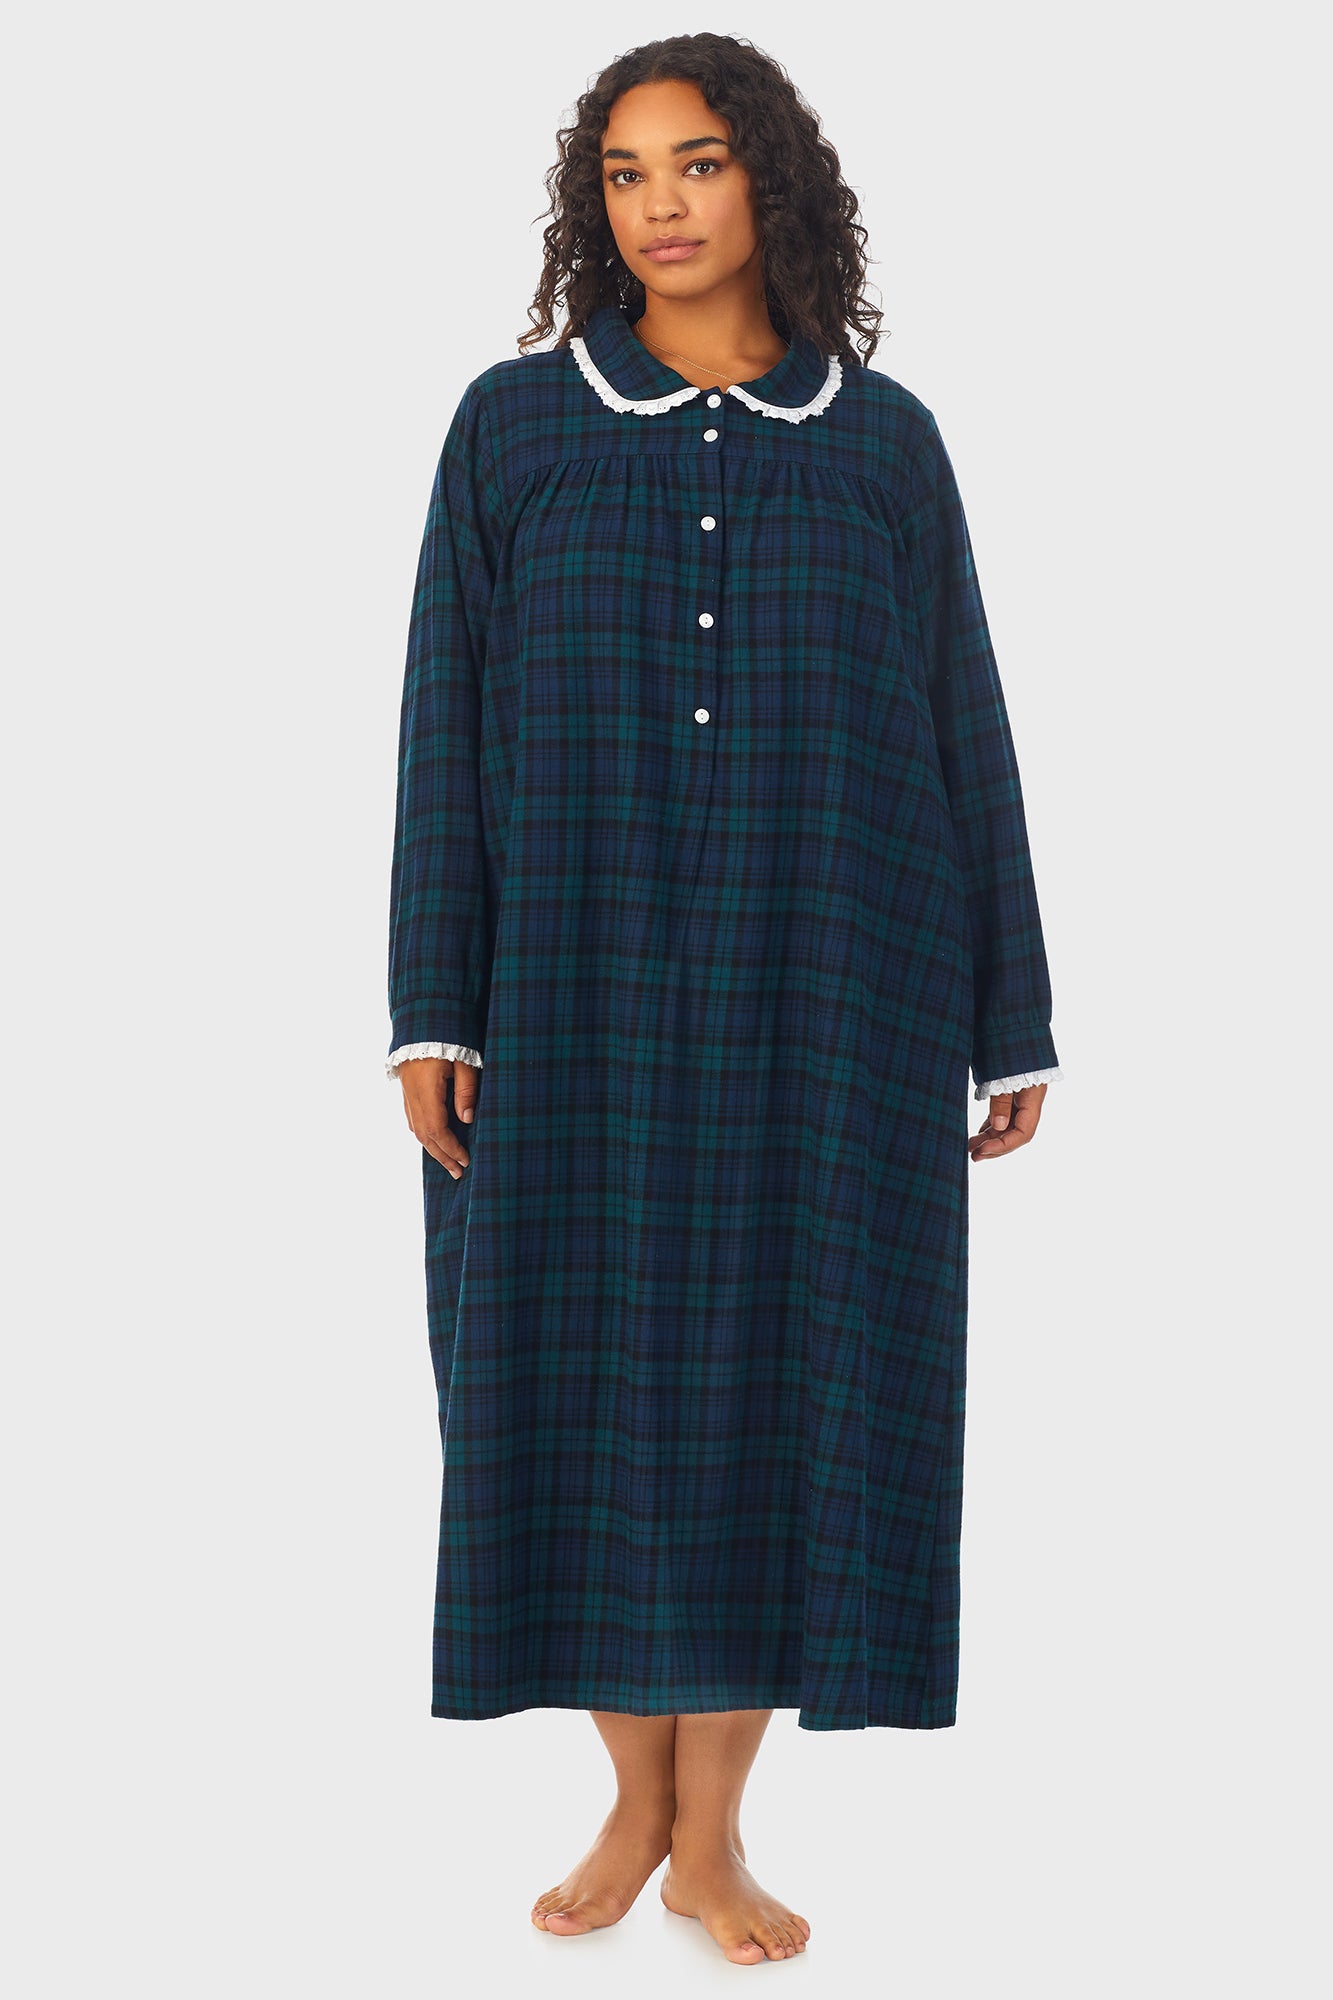  A lady wearing a long sleeve flannel gown plus with black watch peterpan pattern.